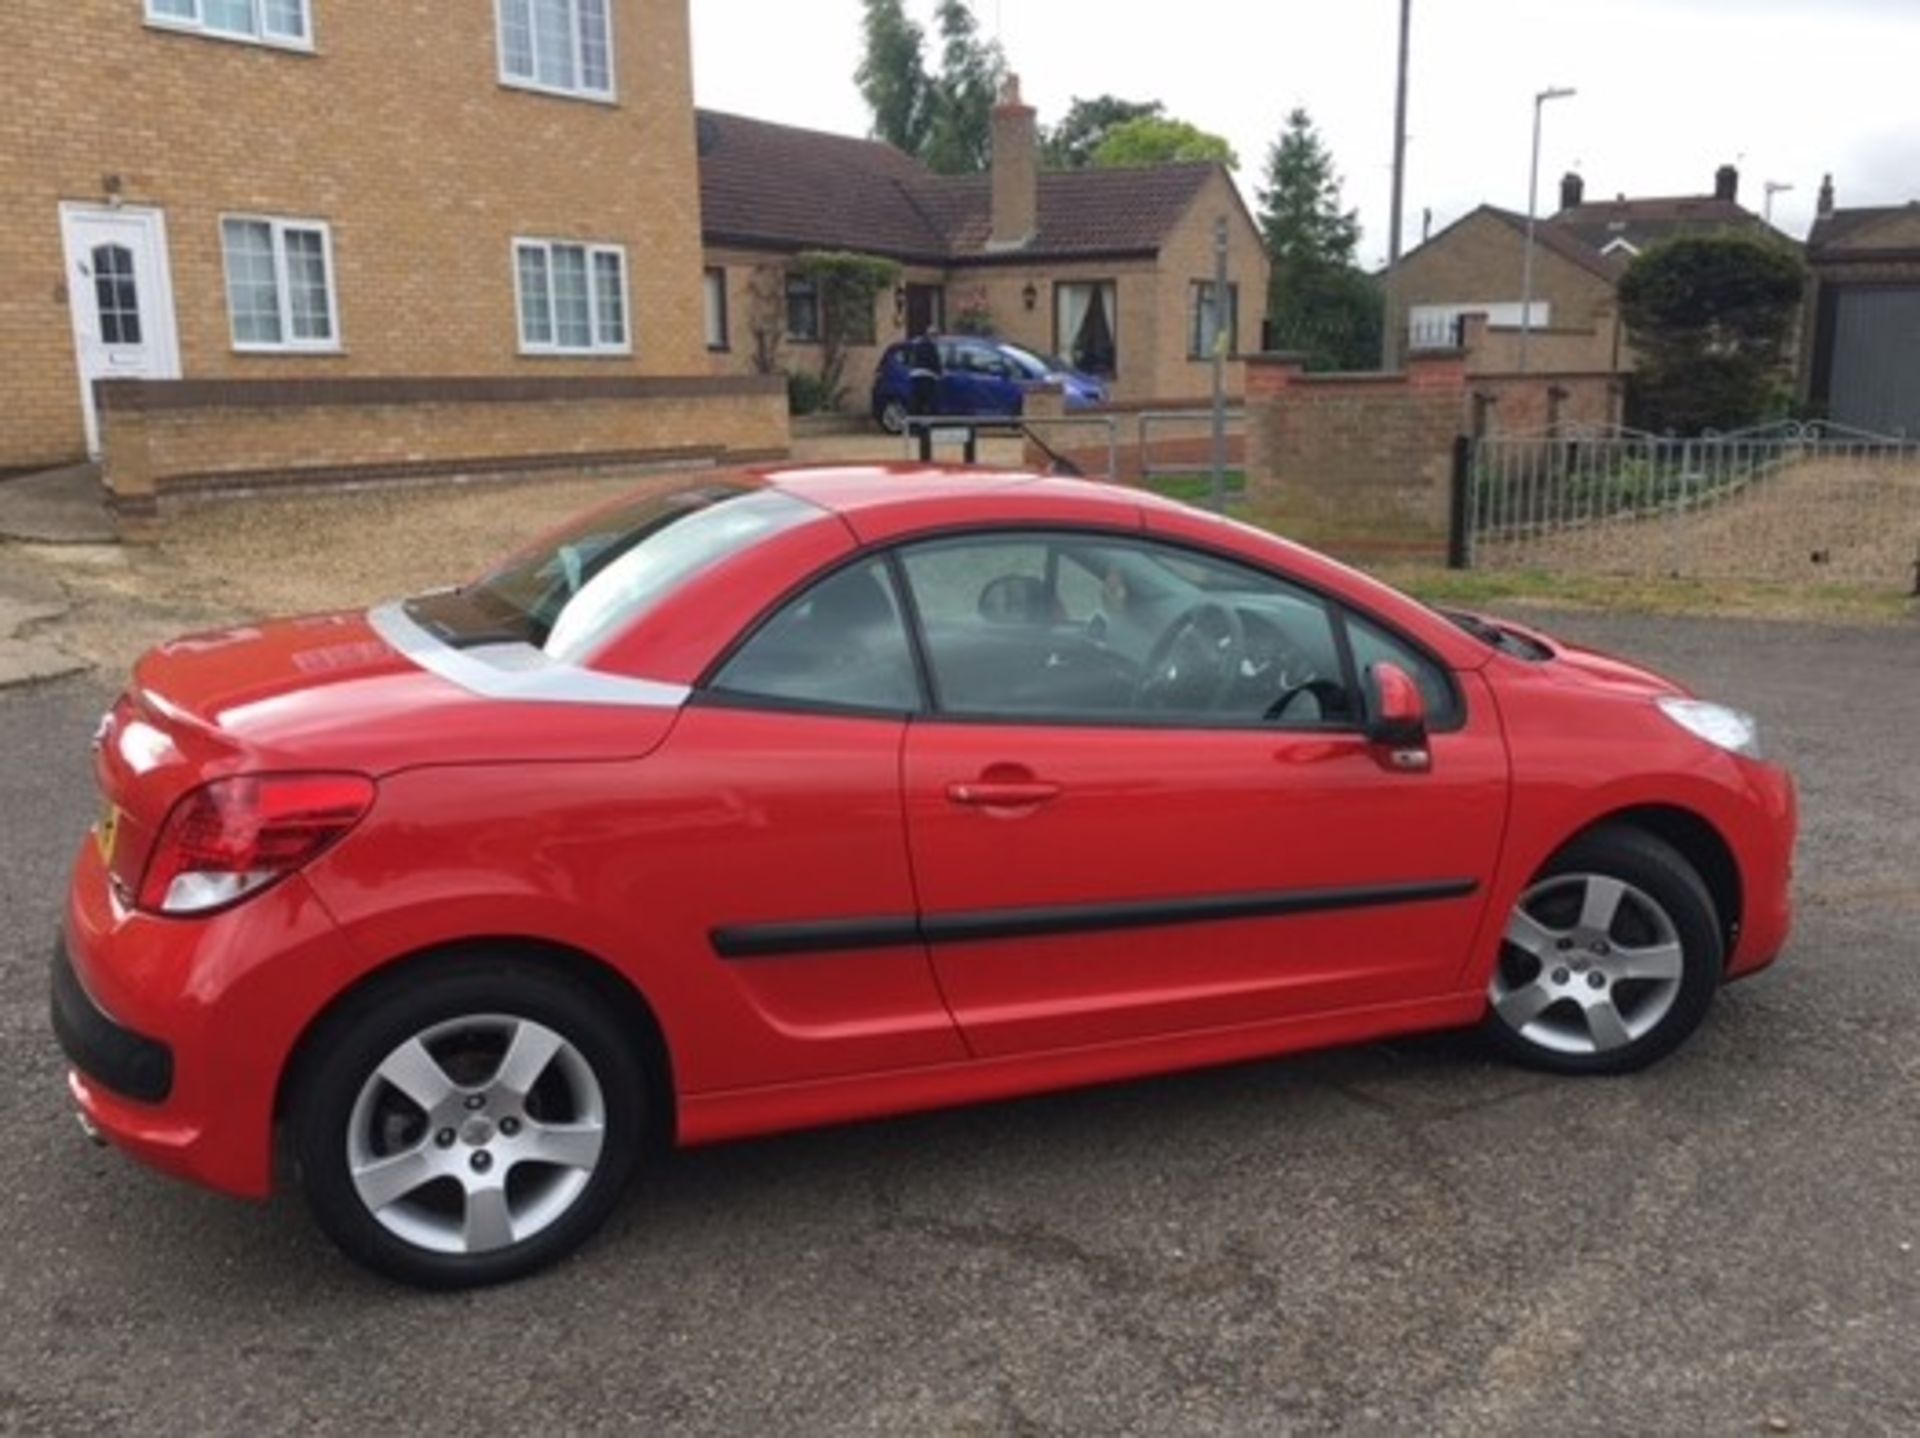 Peugeot 207 Sports Convertible 1598Cc - No VAT on Hammer - Image 12 of 12